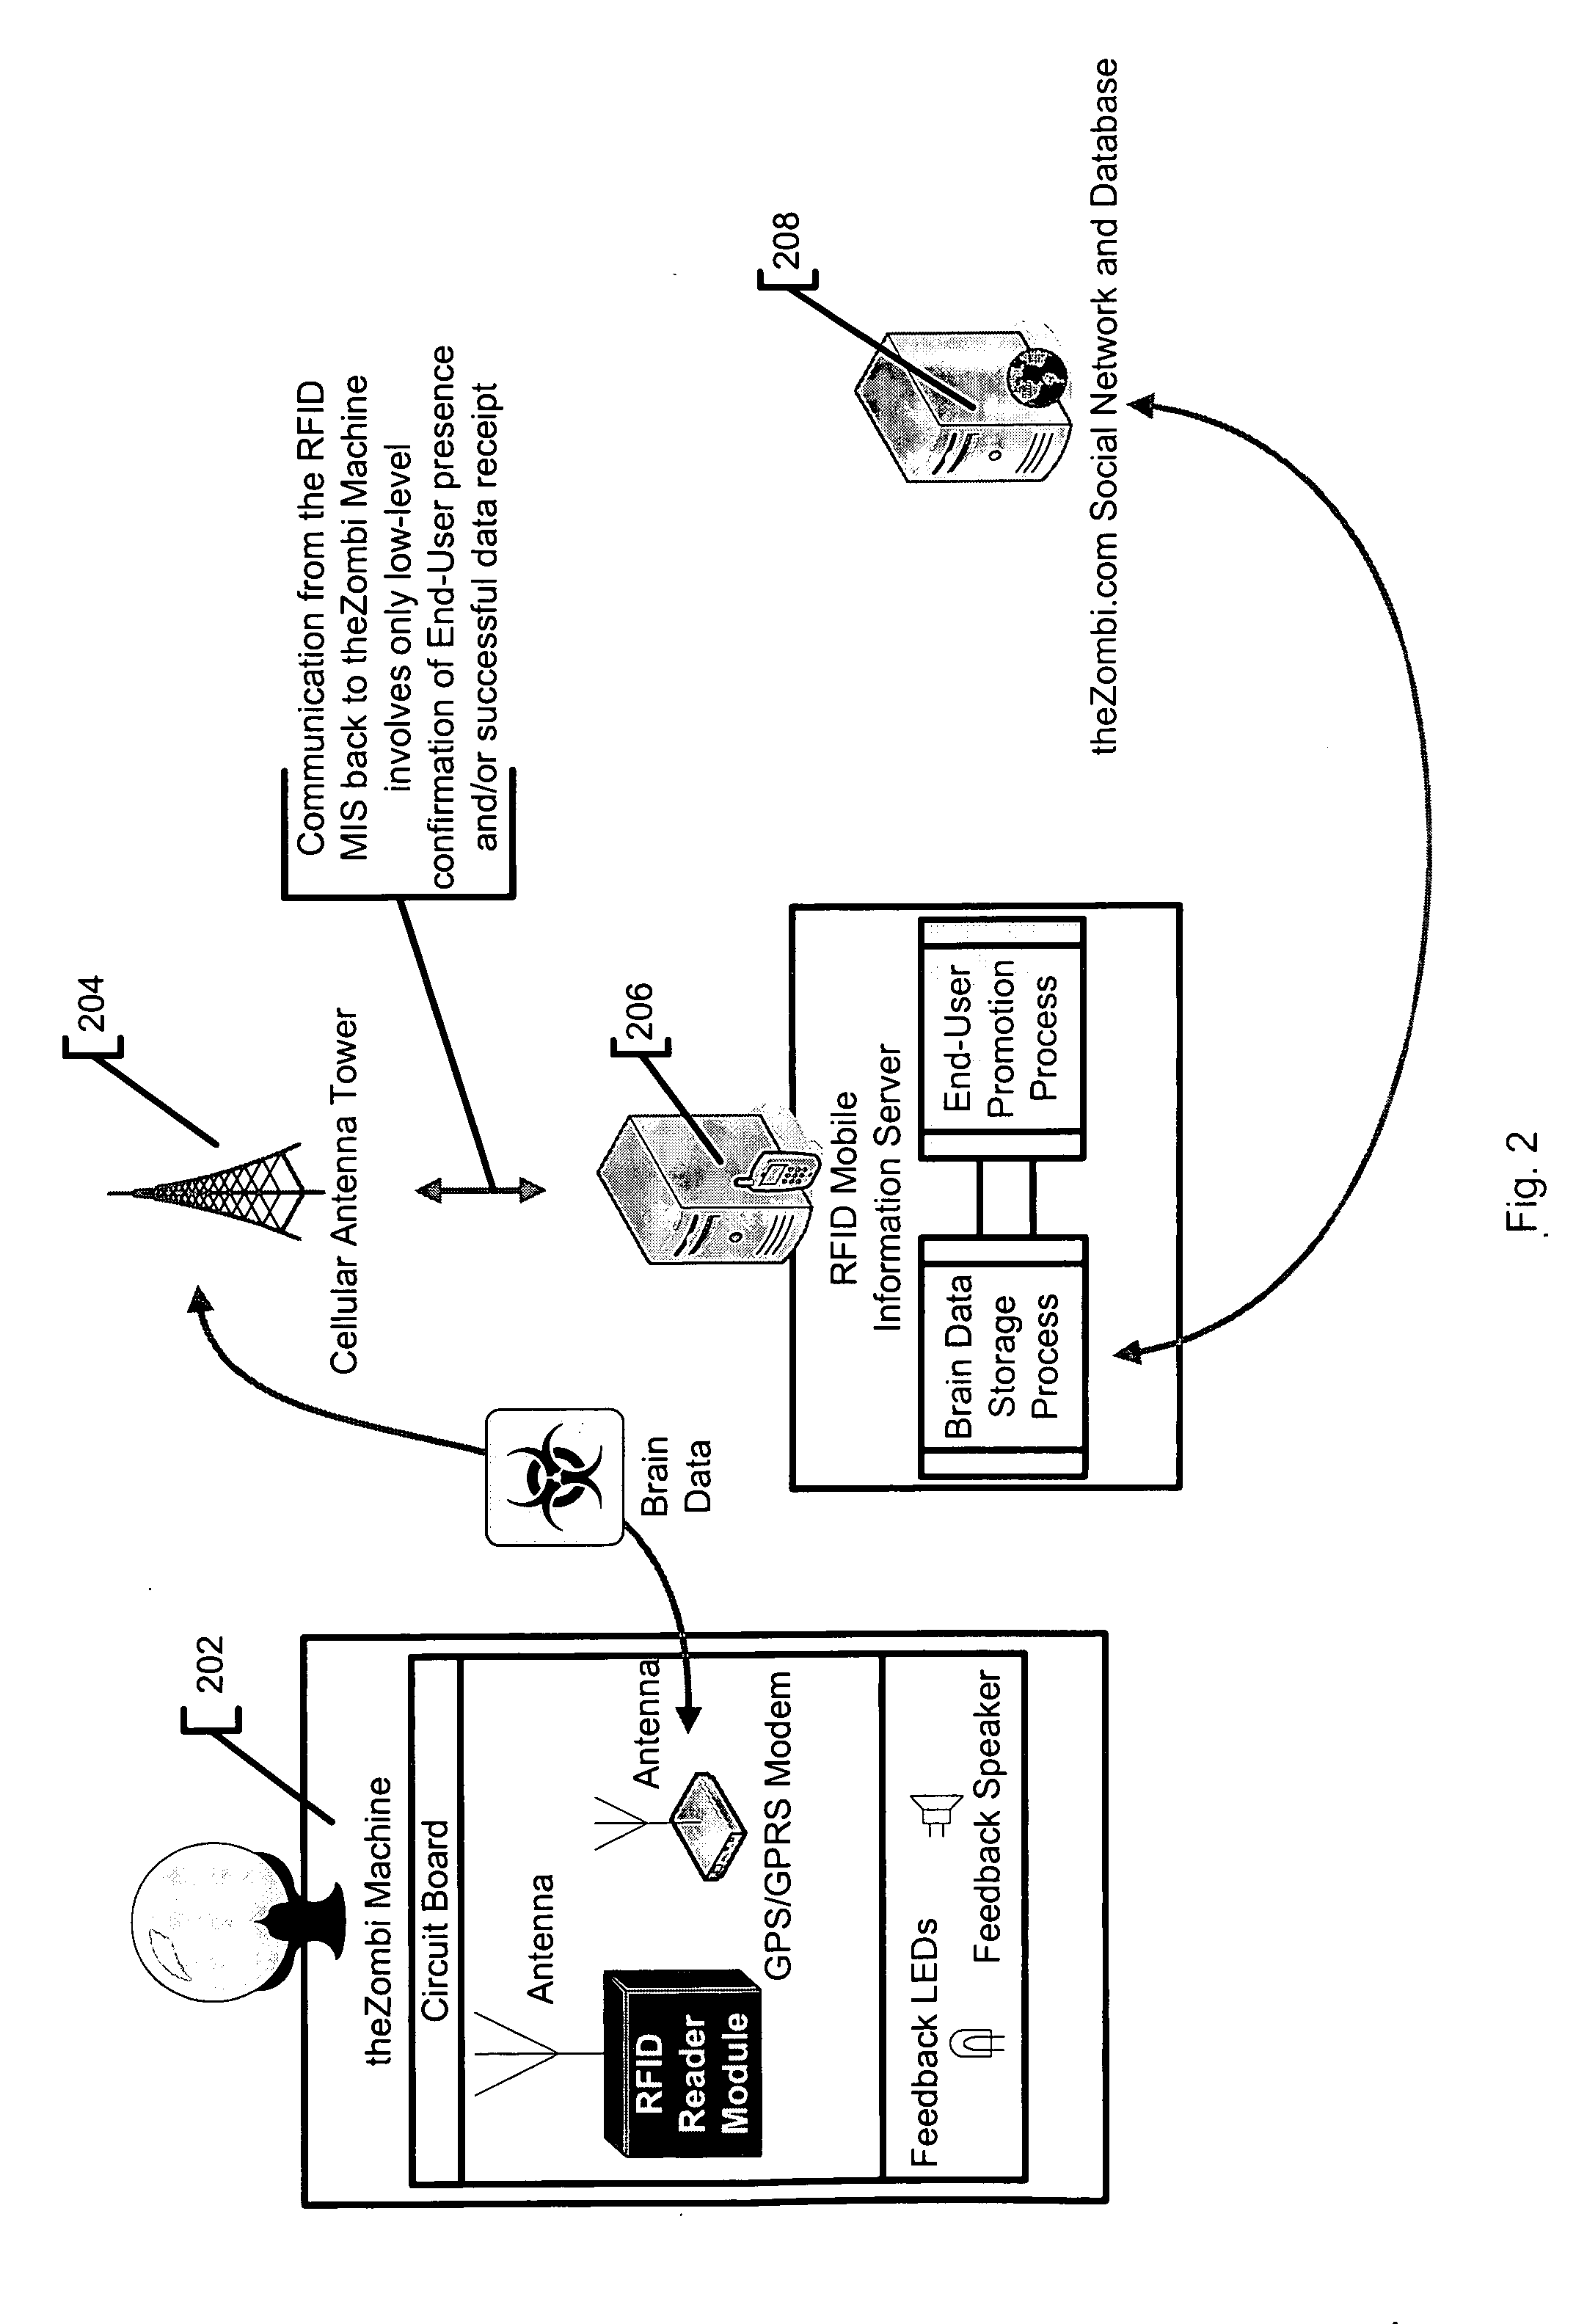 System and method for tracking individuals via remote transmitters attached to personal items